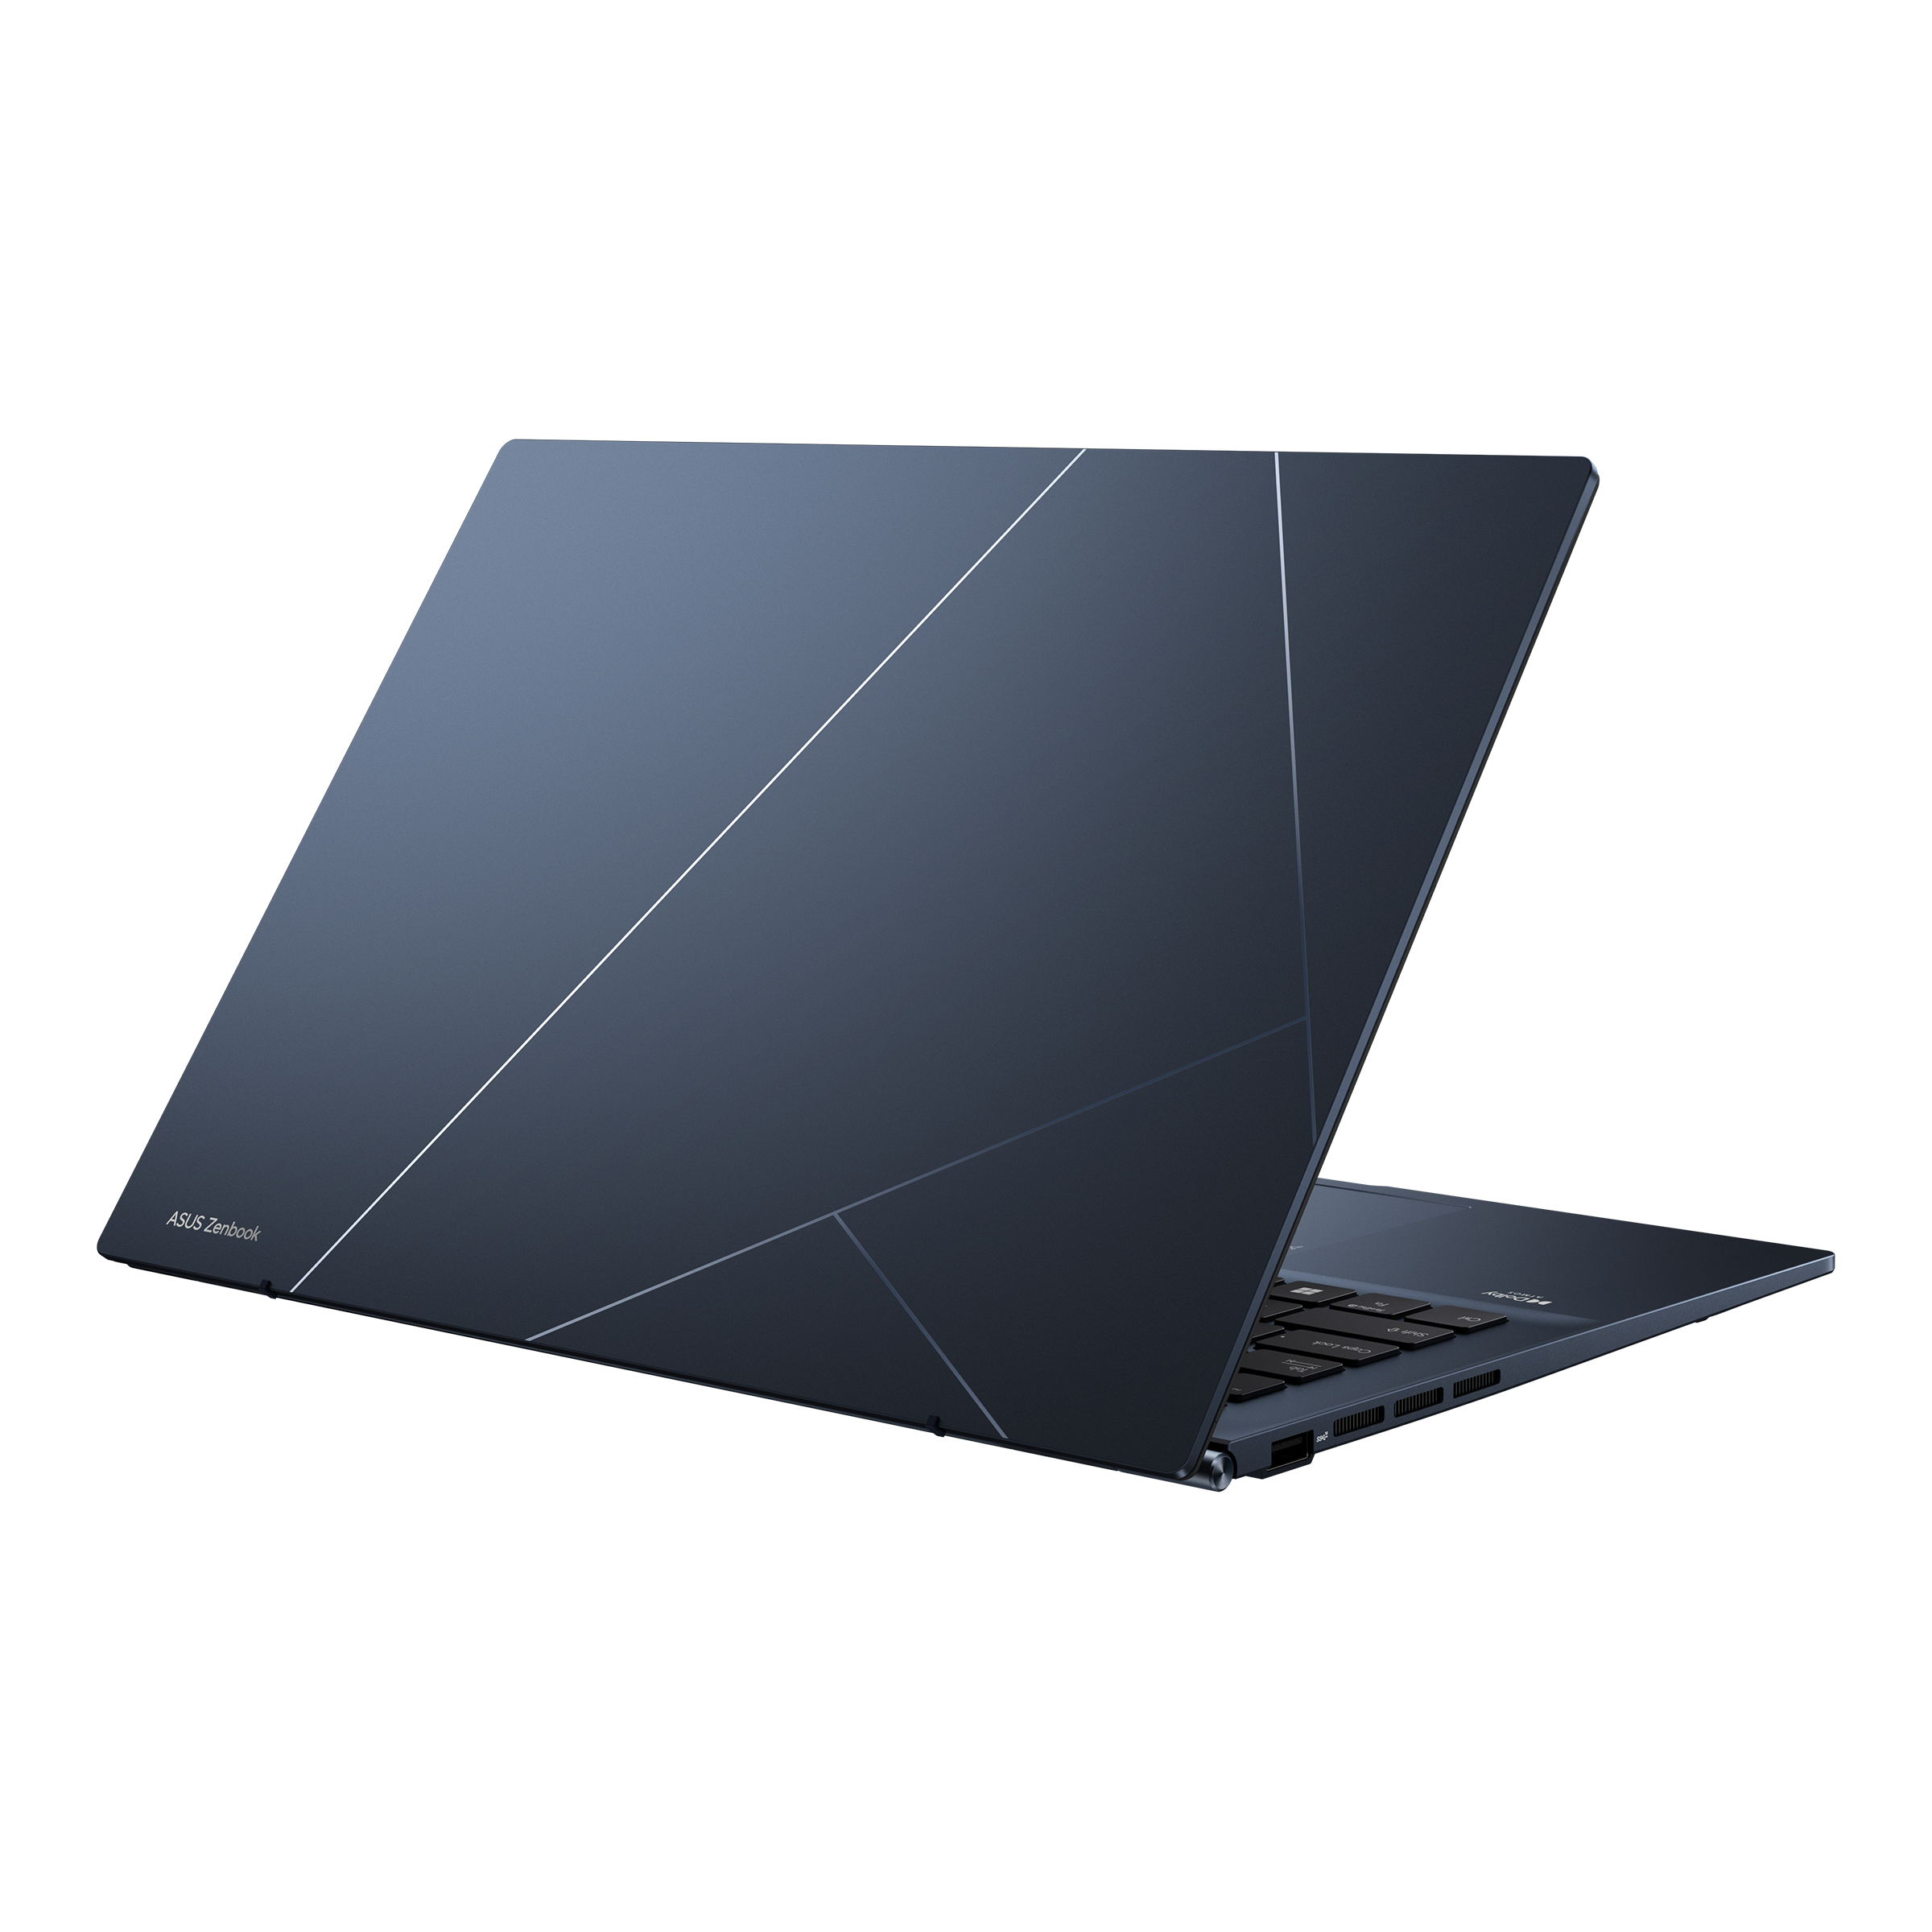 Zenbook 14 OLED (UX3402)｜Laptops For Home｜ASUS USA